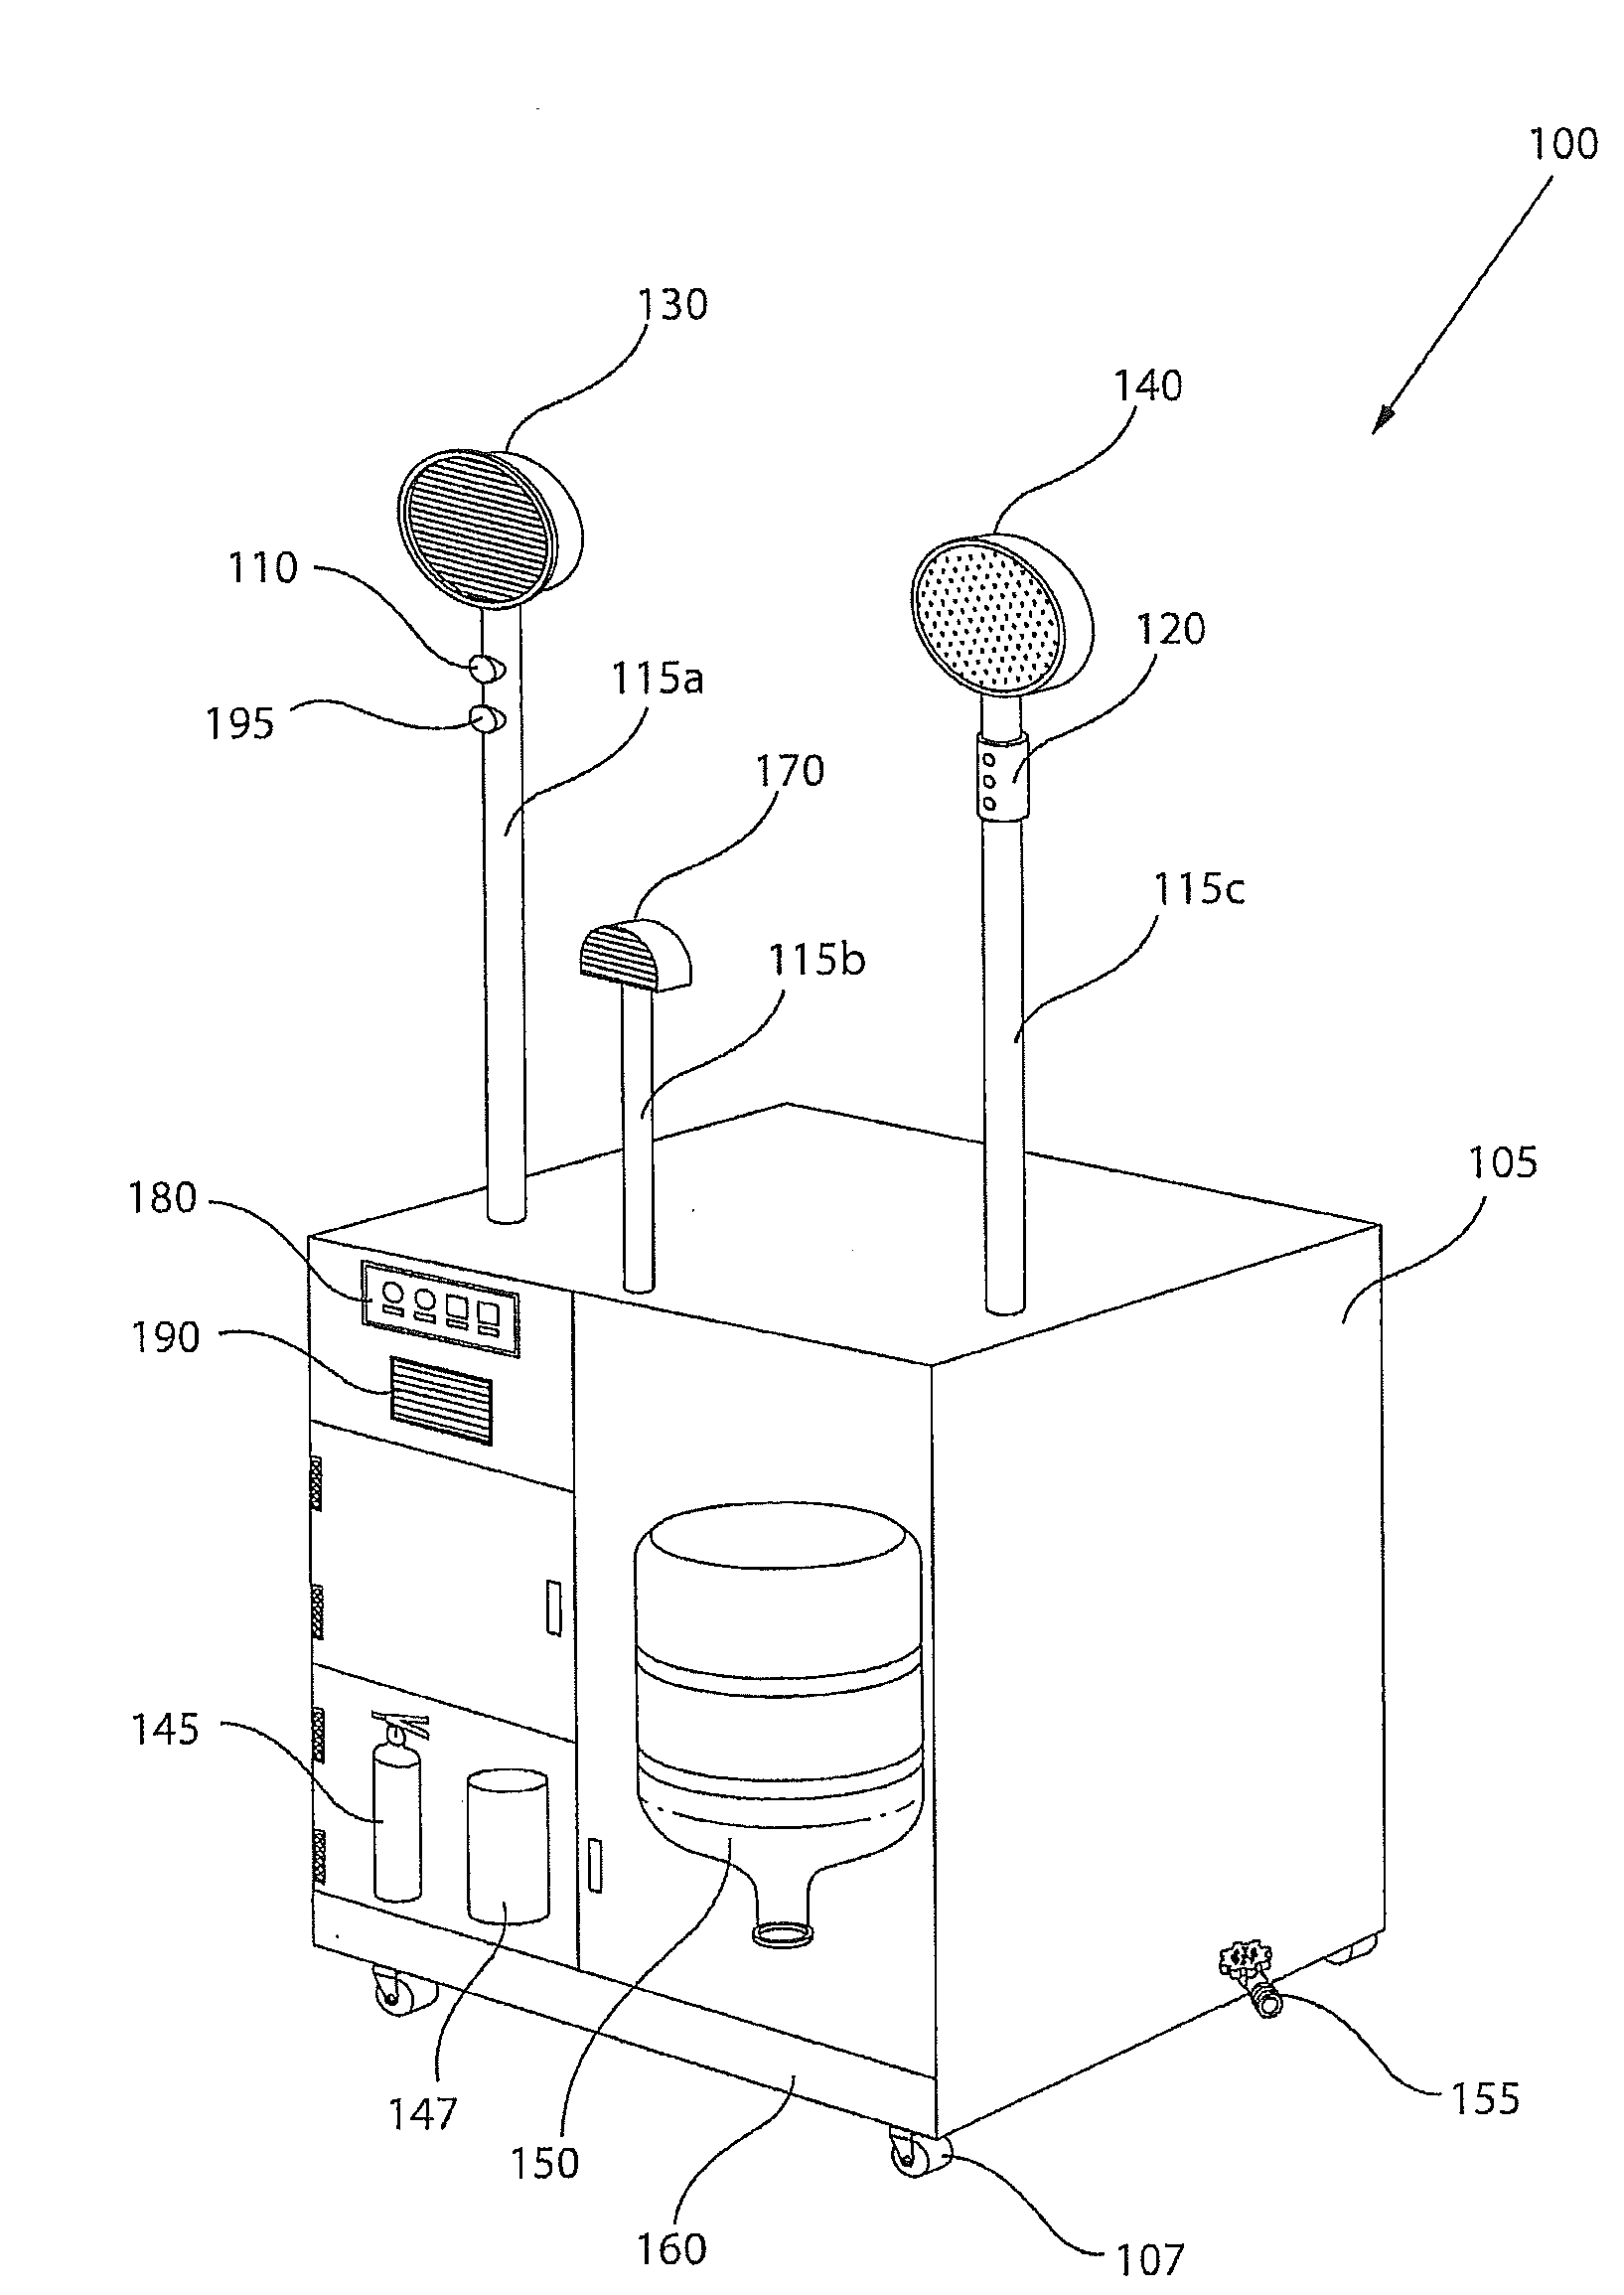 Portable life protection apparatus, system and method